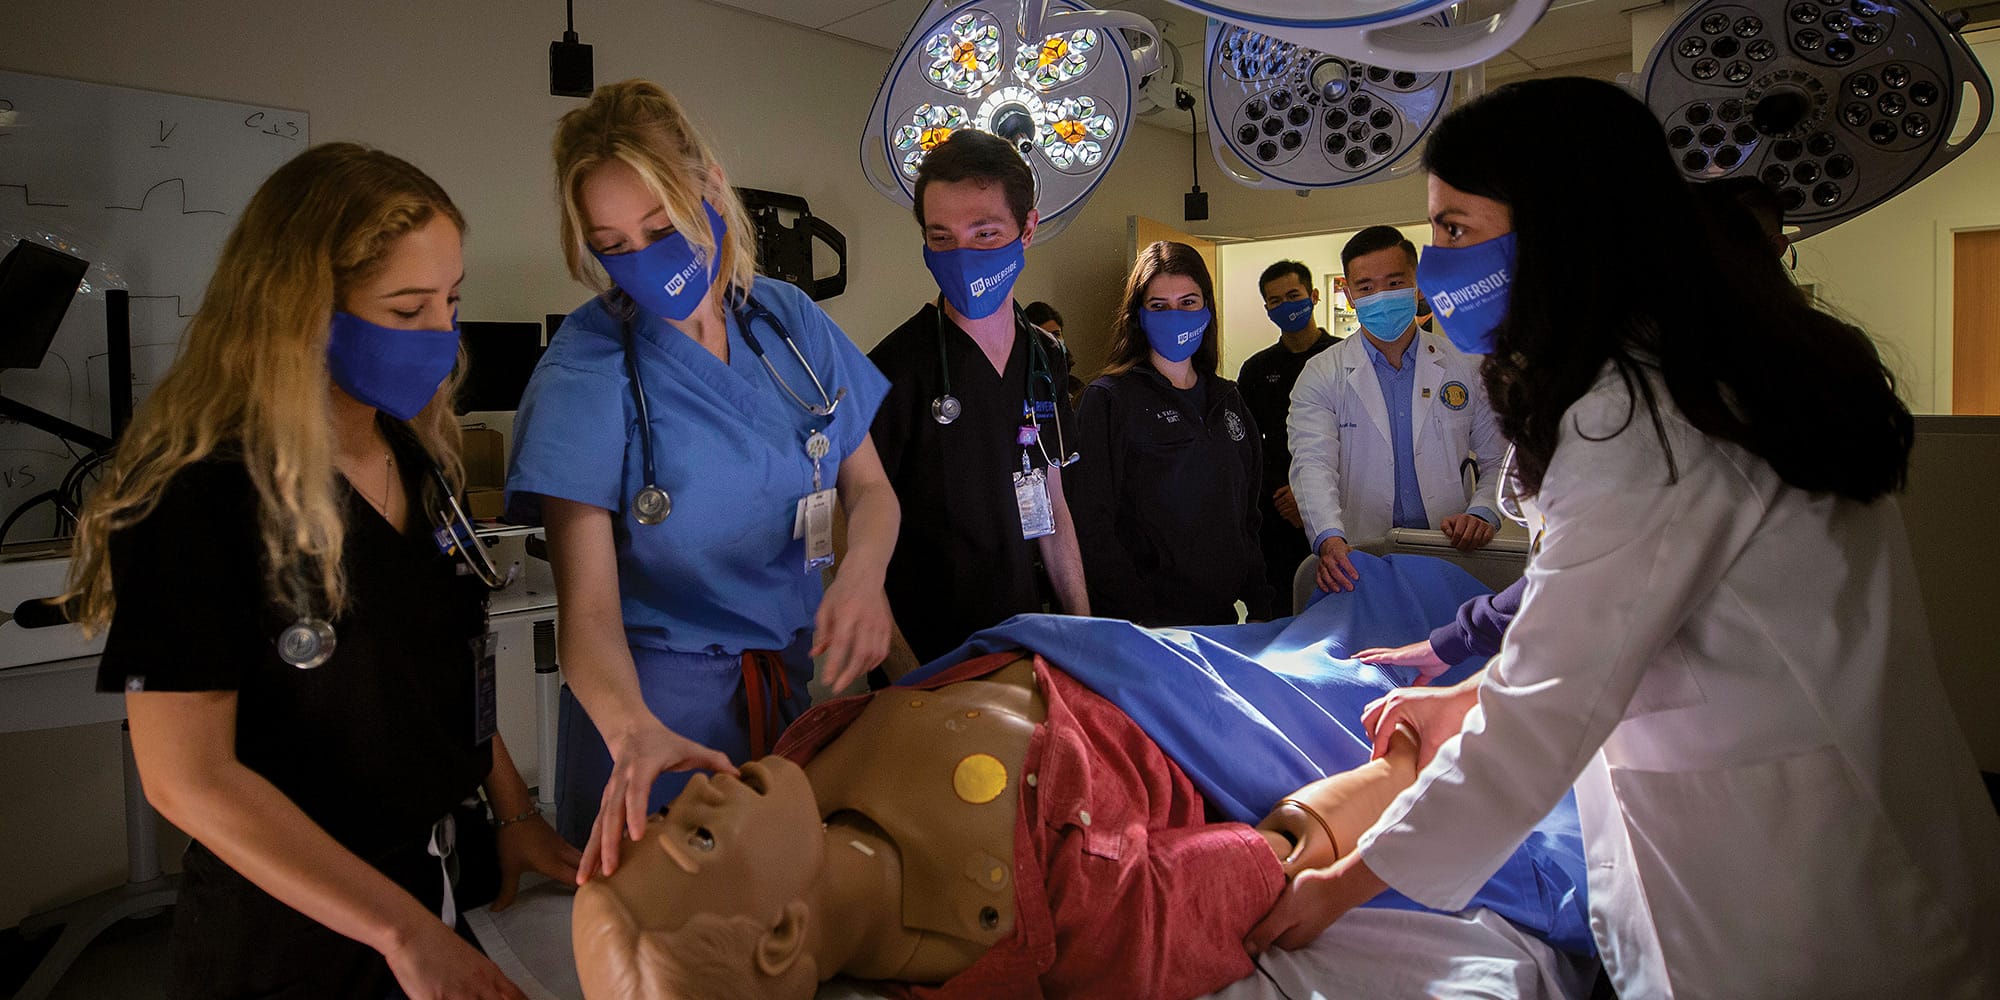 The medical school’s Clinical Skills & Simulation Suite features mock exam rooms and ER/ICU simulation spaces.